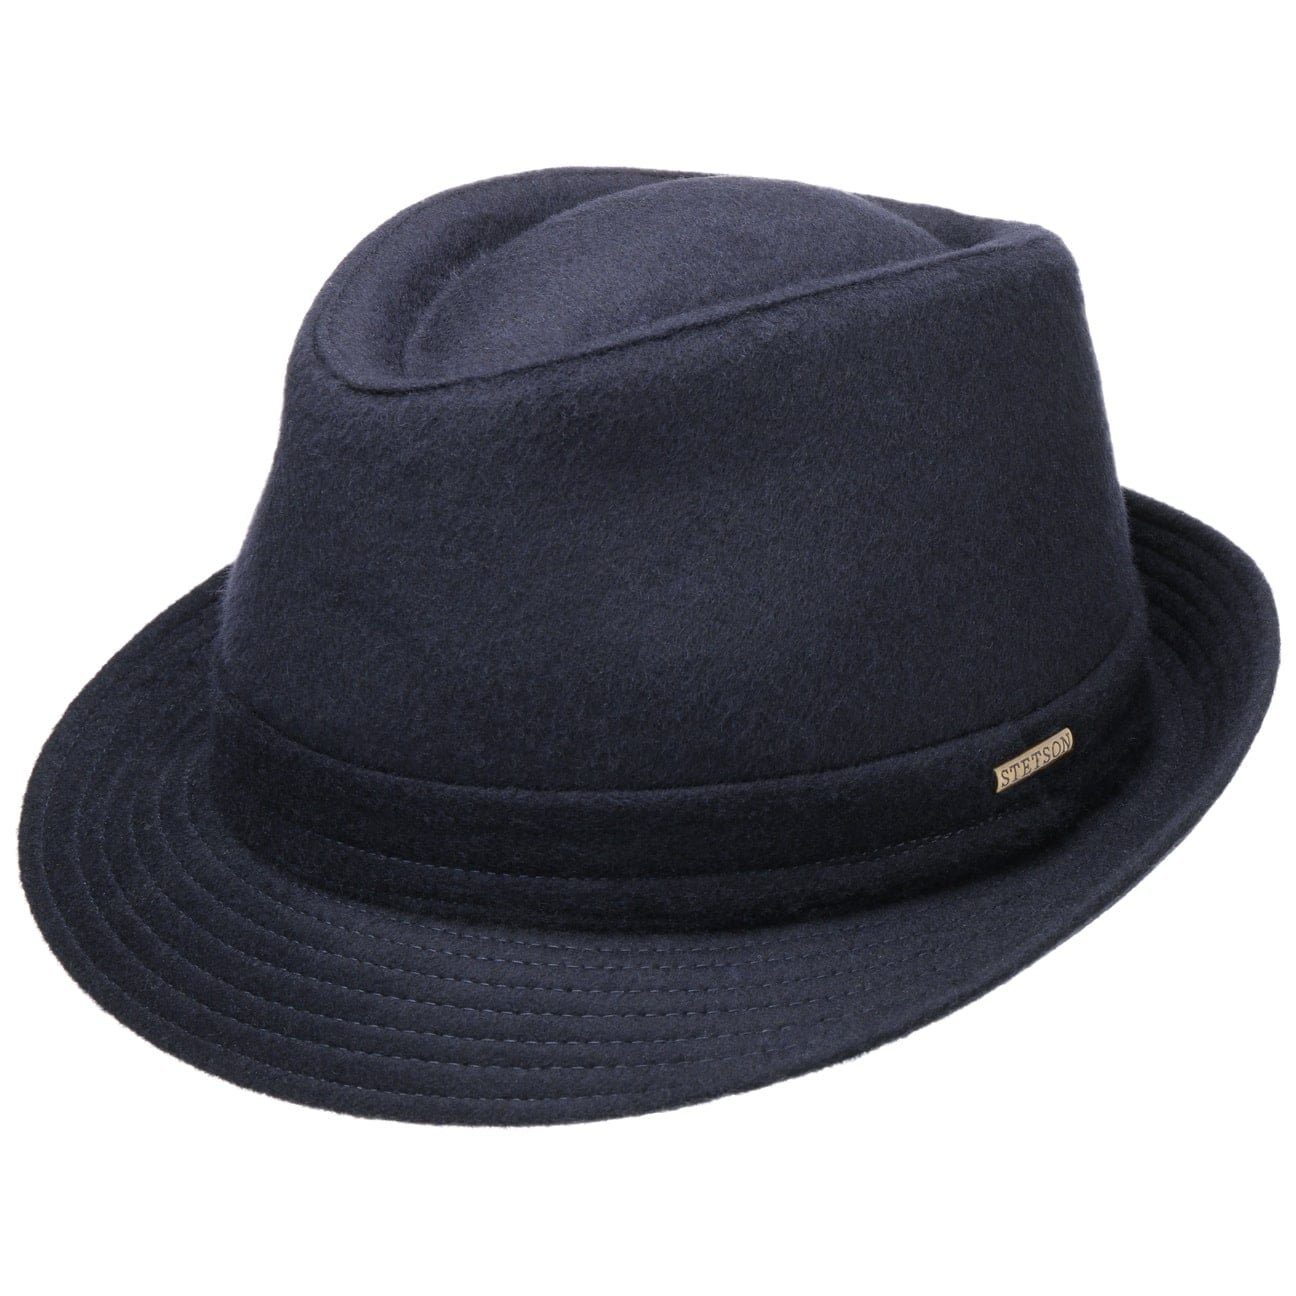 Stetson Trilby (1-St) Trilby mit Futter, Made in Italy blau